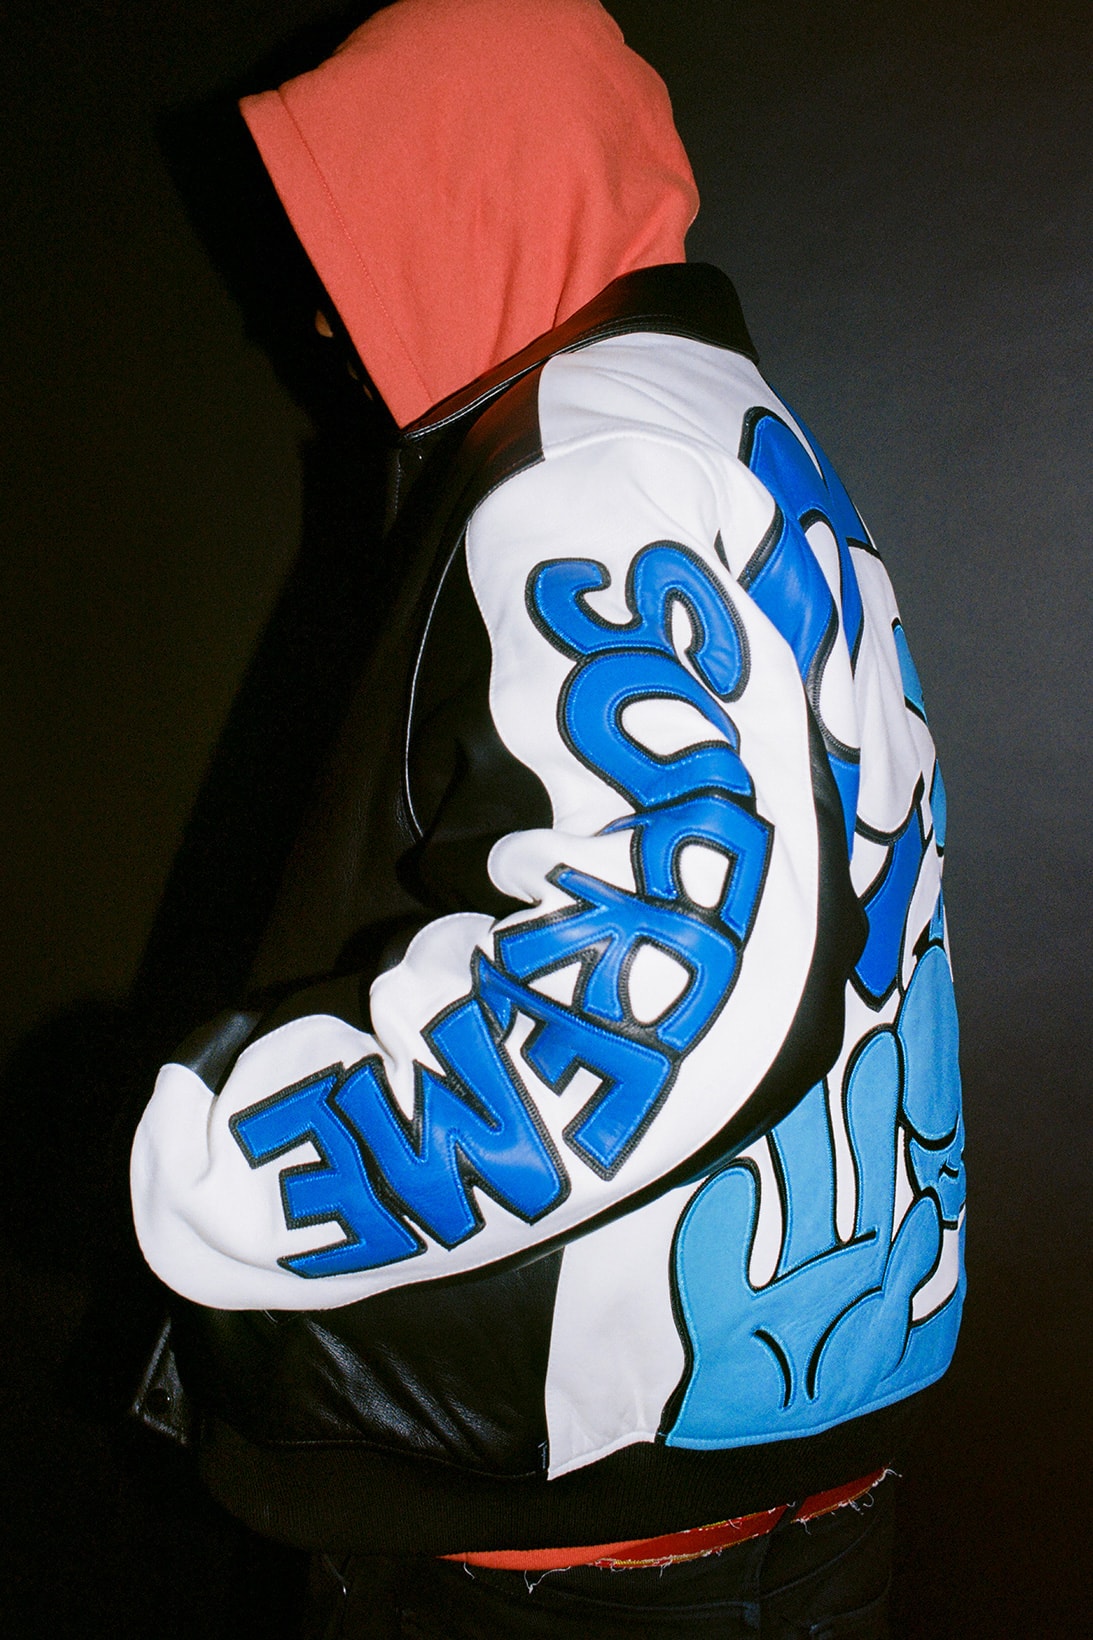 supreme the smurfs collaboration full look leather jackets gore-tex hoodies beanies release info